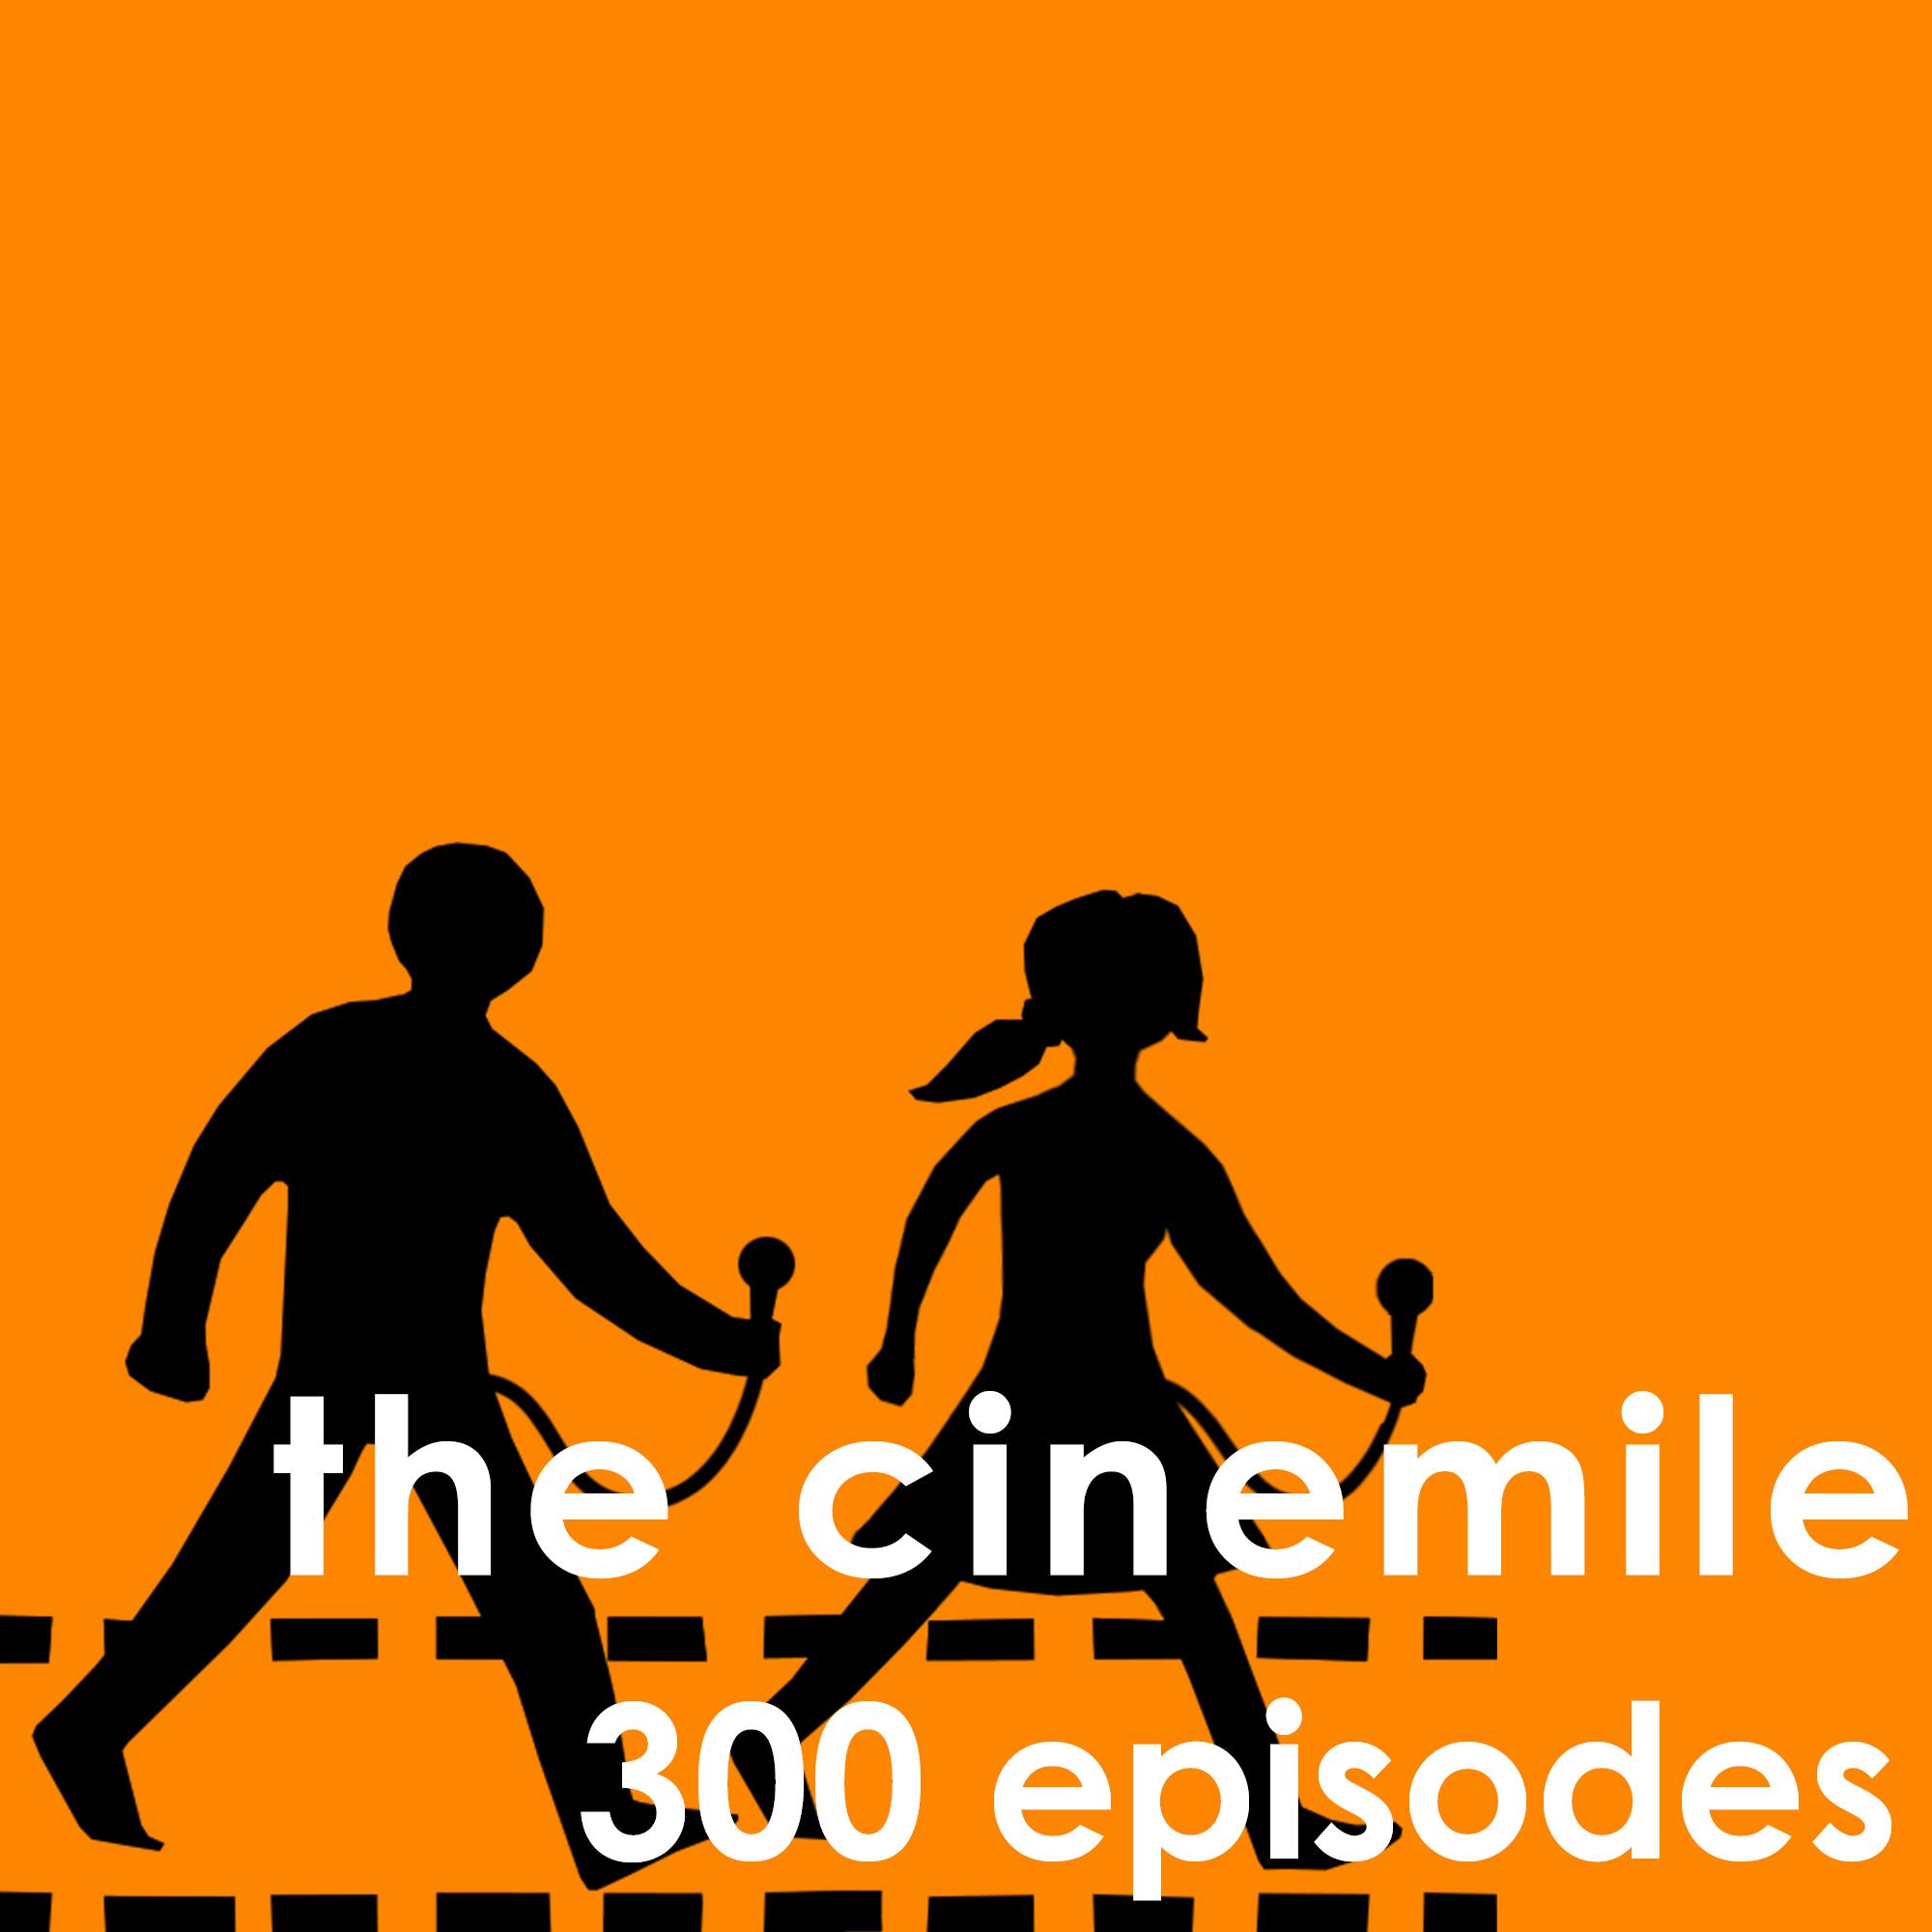 Ep 300 - A Look Back over 300 Episodes